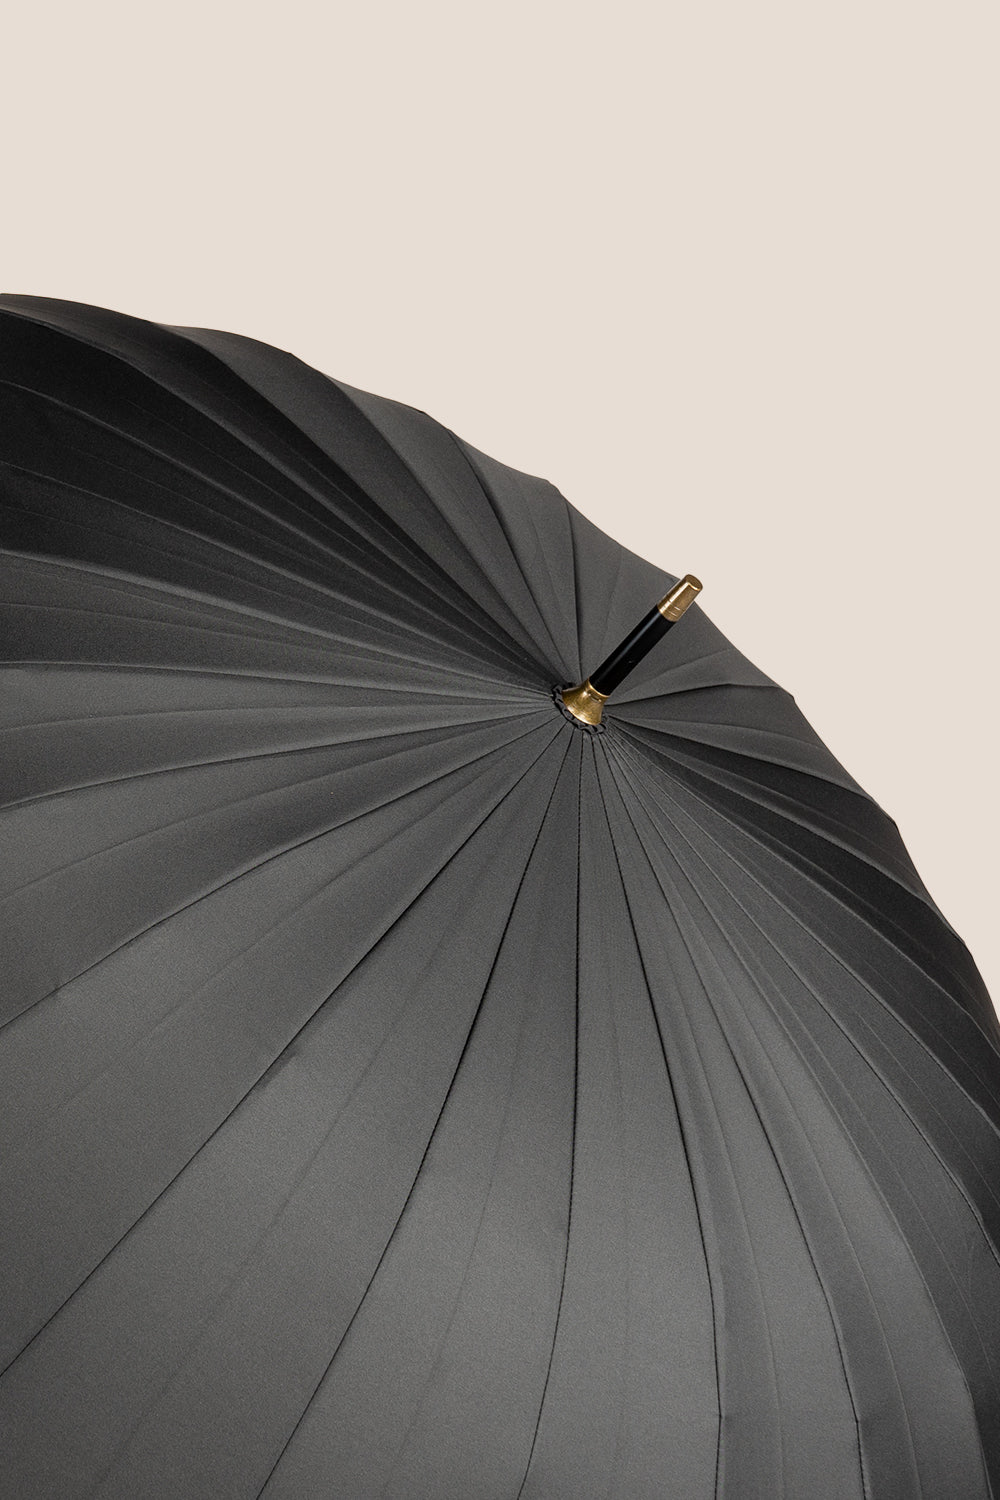 Oswin Hyde umbrella with wooden handle in black